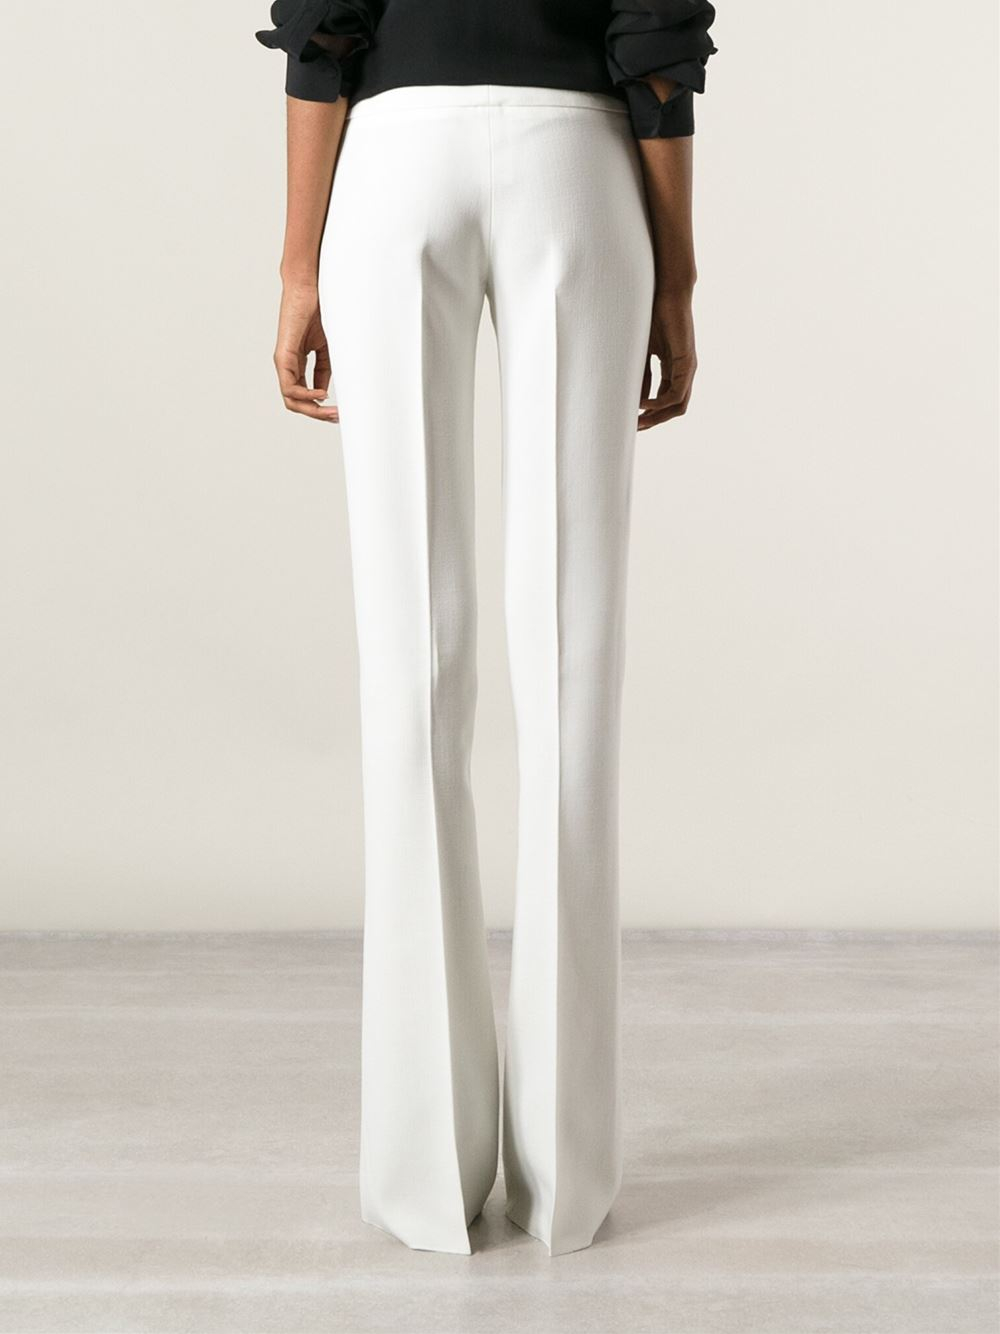 Lyst - Emilio Pucci Flared Trousers in White